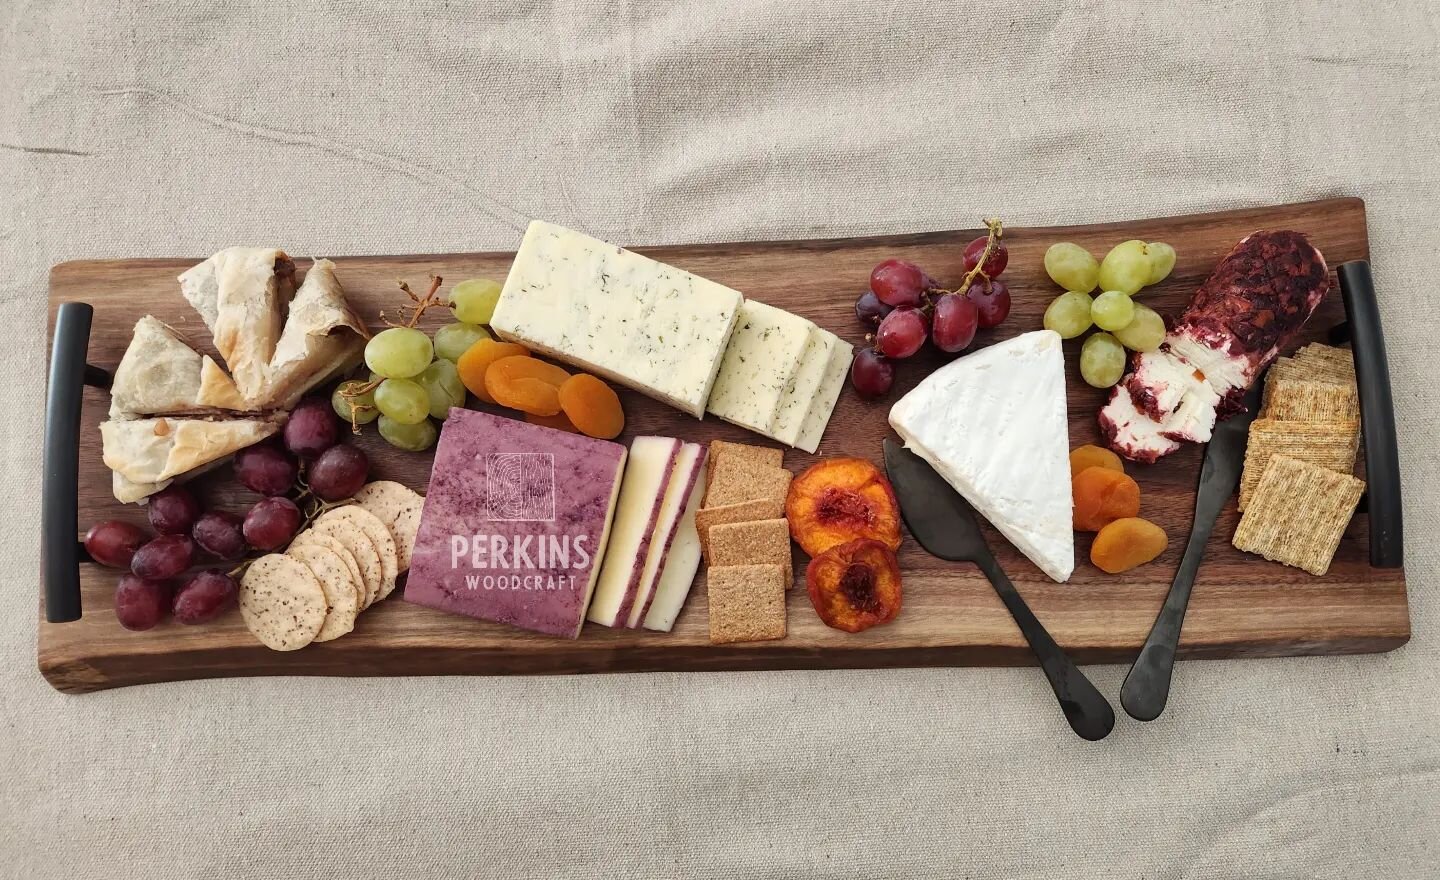 I never posted these pictures?? The Cheese Board in its full glory!!! 
#cheeseboard #cheese #charcuterieboard #charcuterieboard #brie #goatcheese #liveedge #liveedgefurniture #handcrafted #madeinamerica